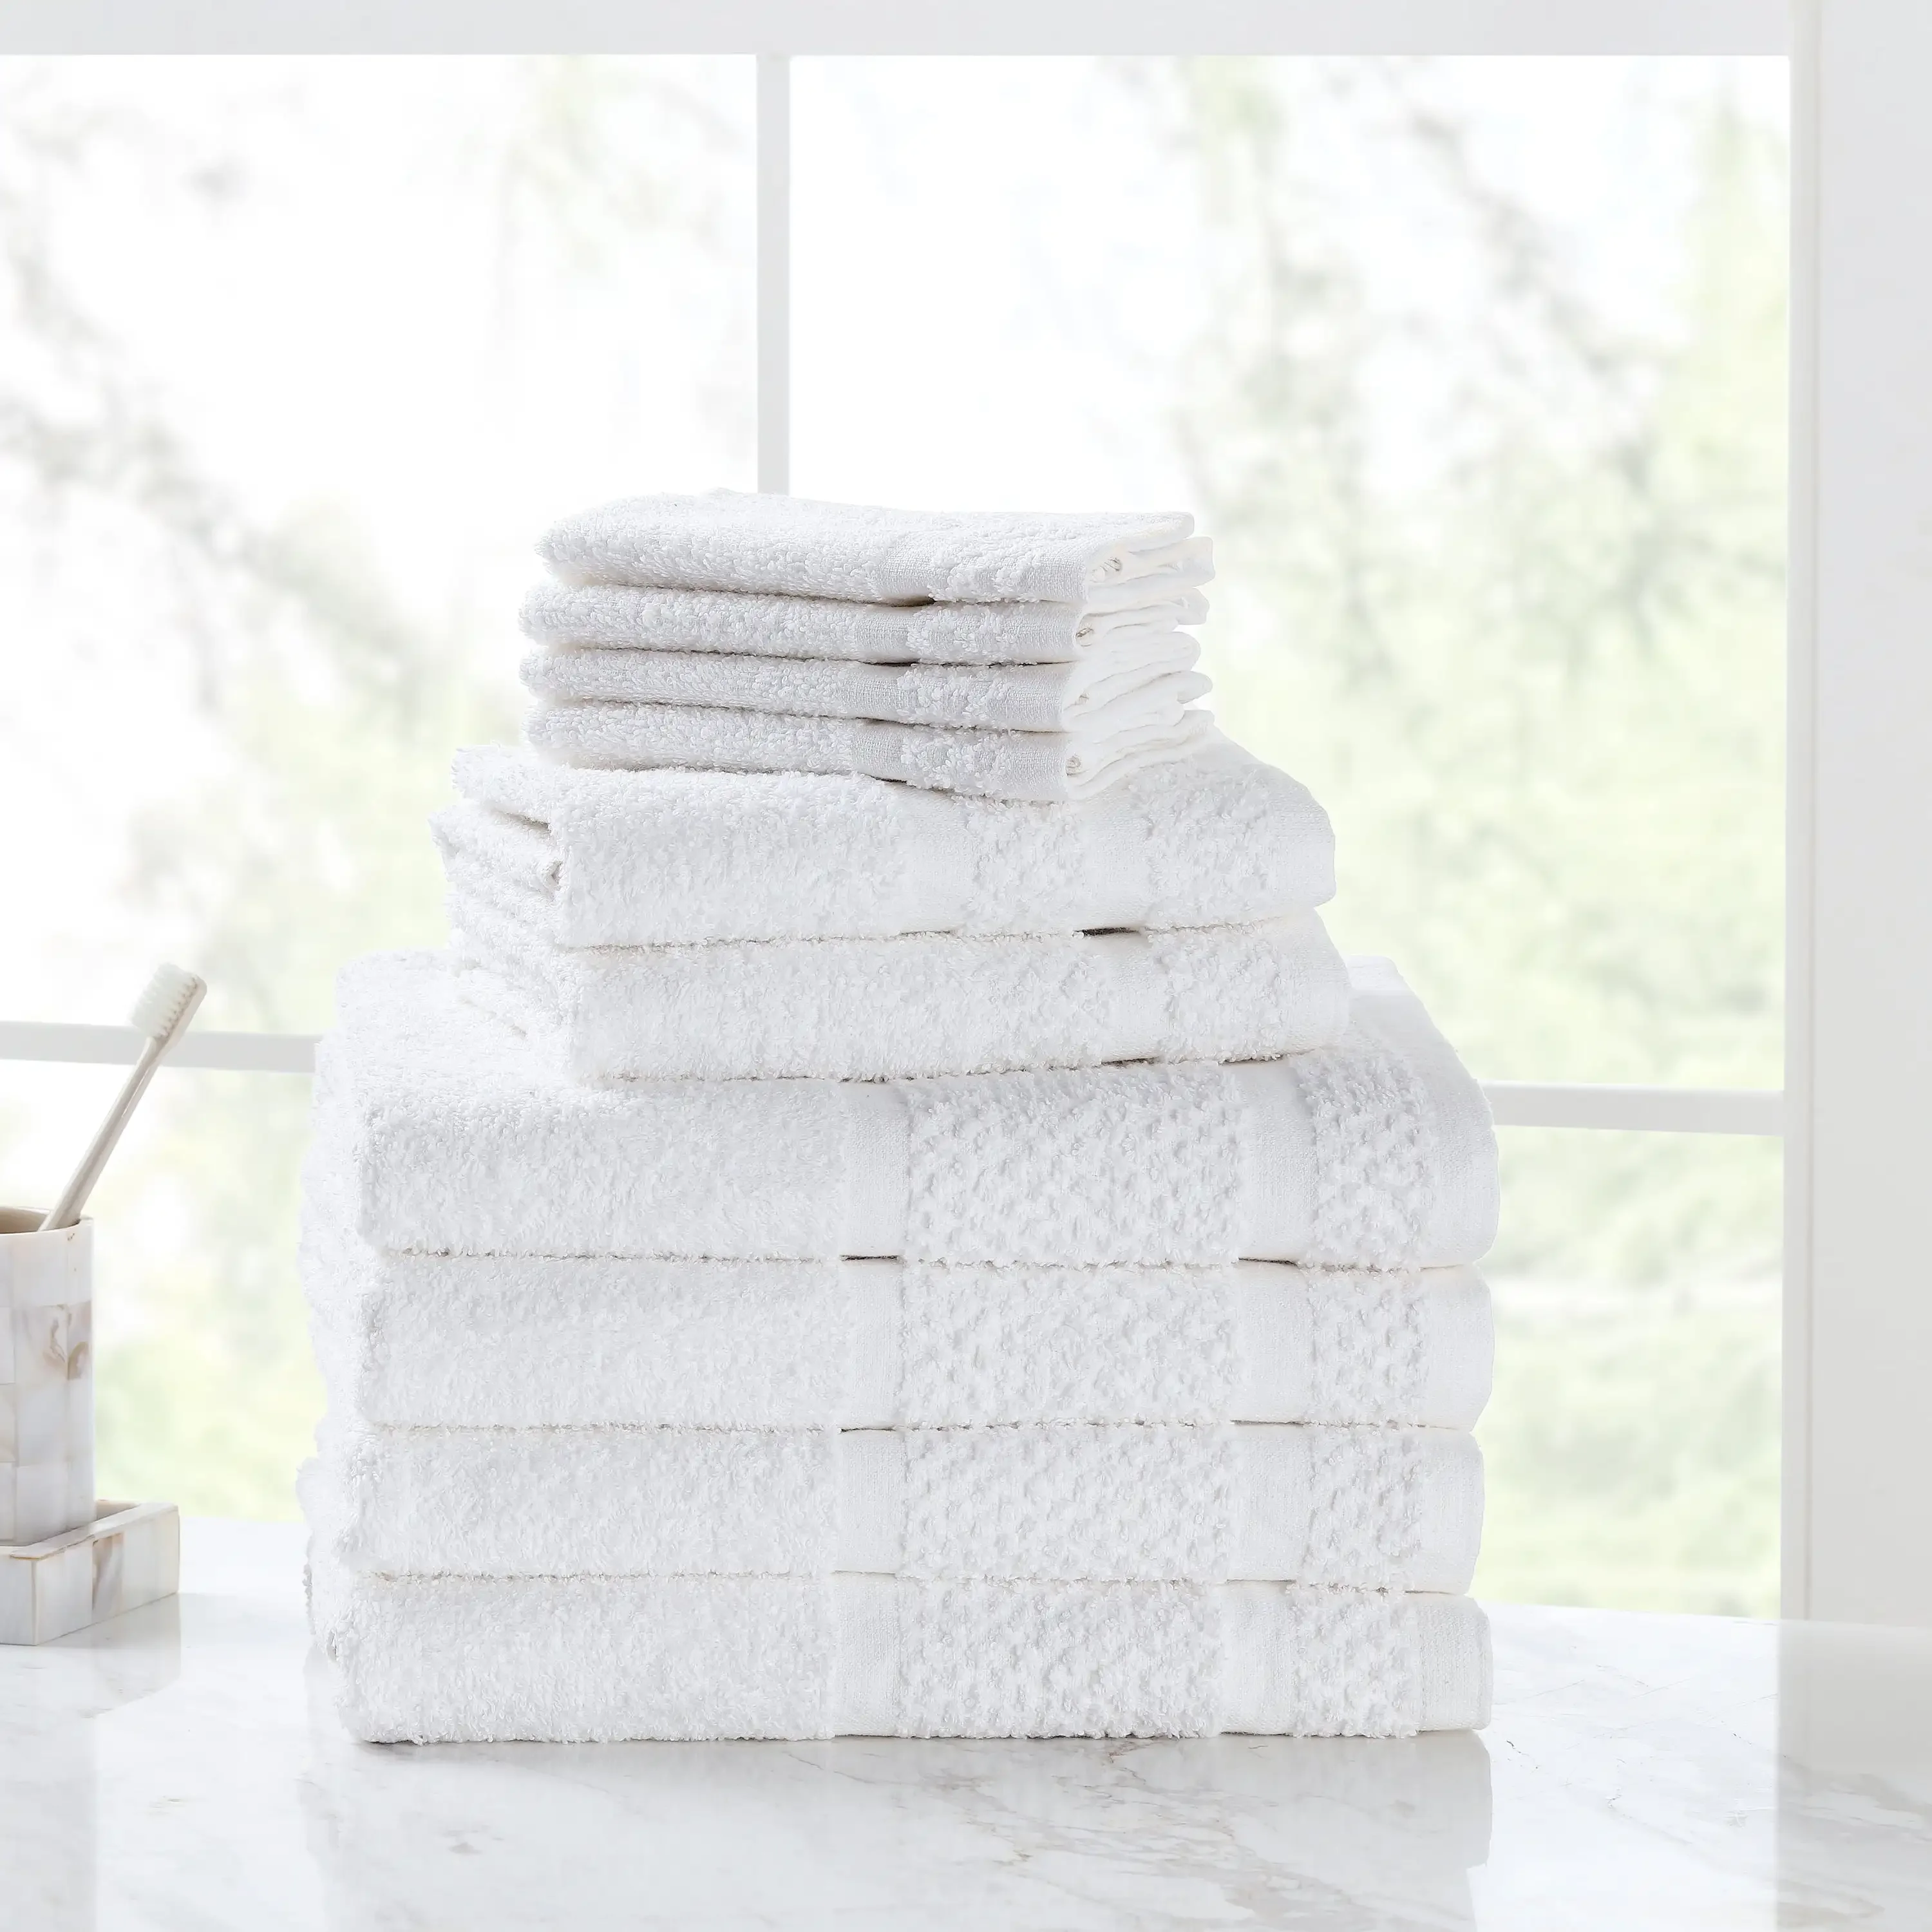 

10 Piece Bath Towel Set with Upgraded Softness & Durability, White Rapid Transit Bath Towels for Adults Towels Bathroom